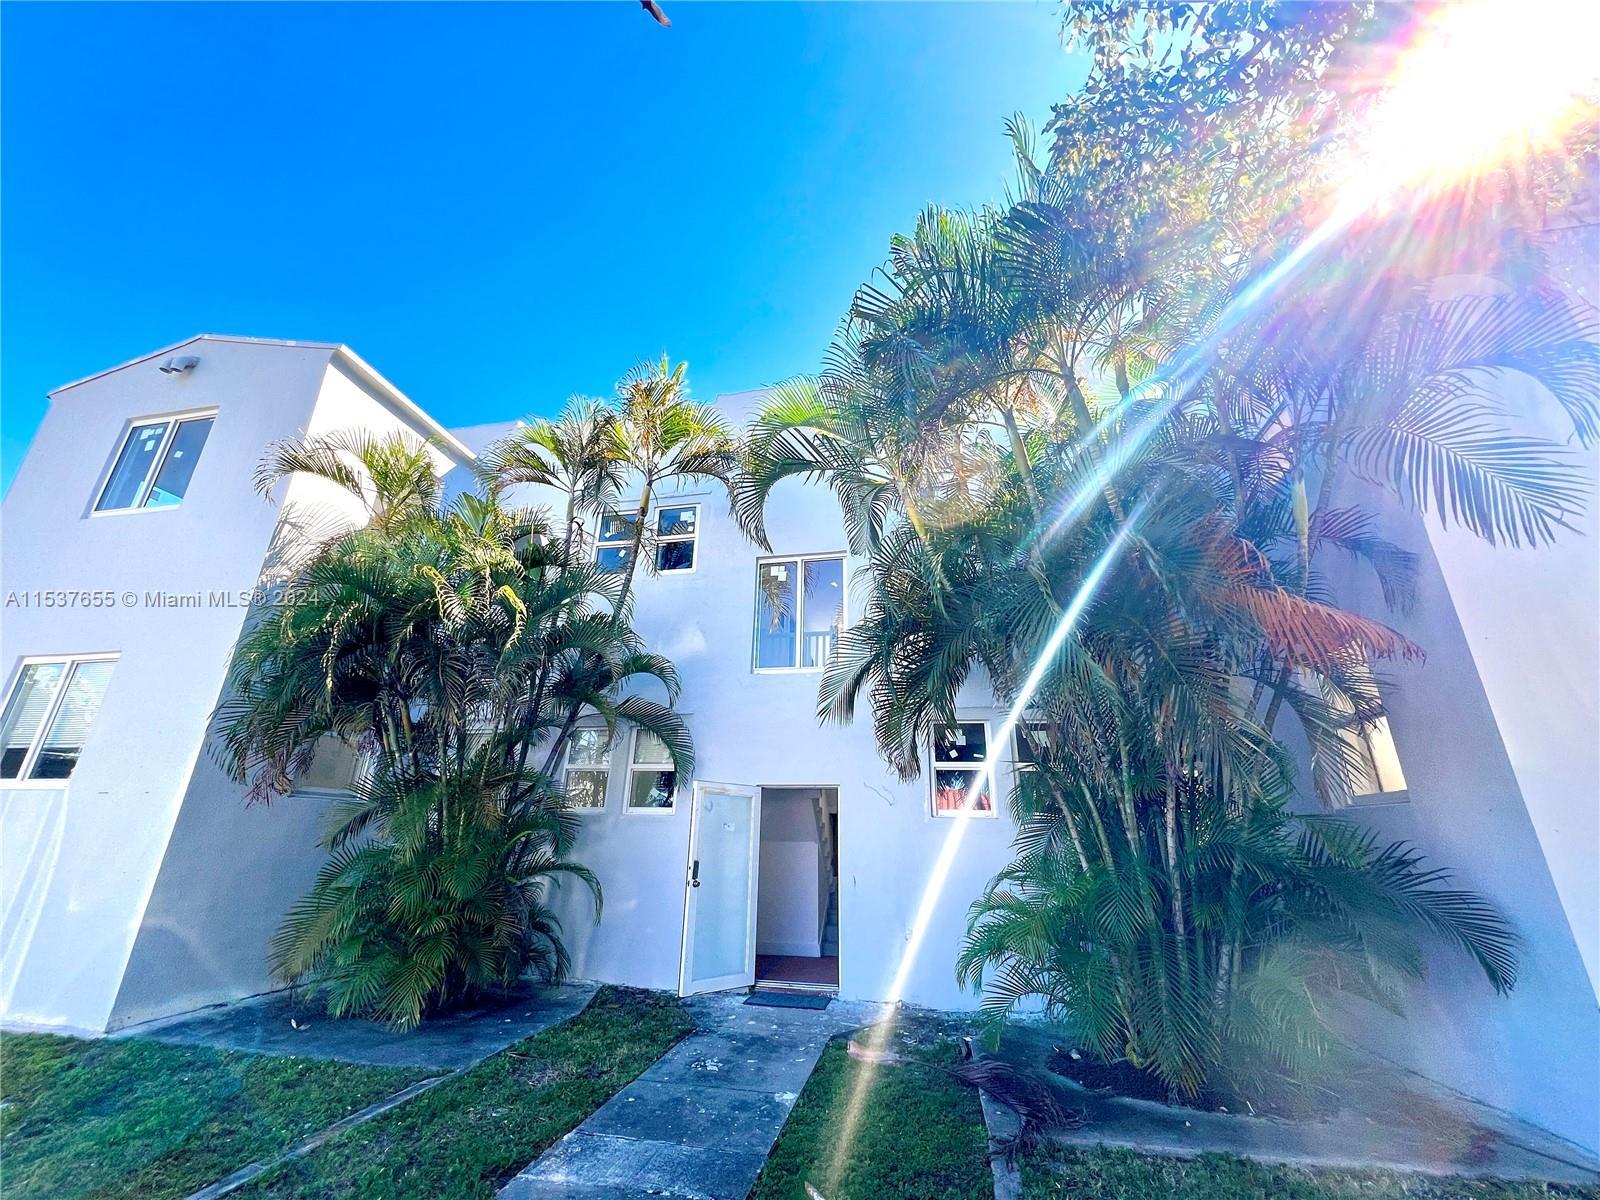 Photo of 1015 S 17th Ave #8 in Hollywood, FL